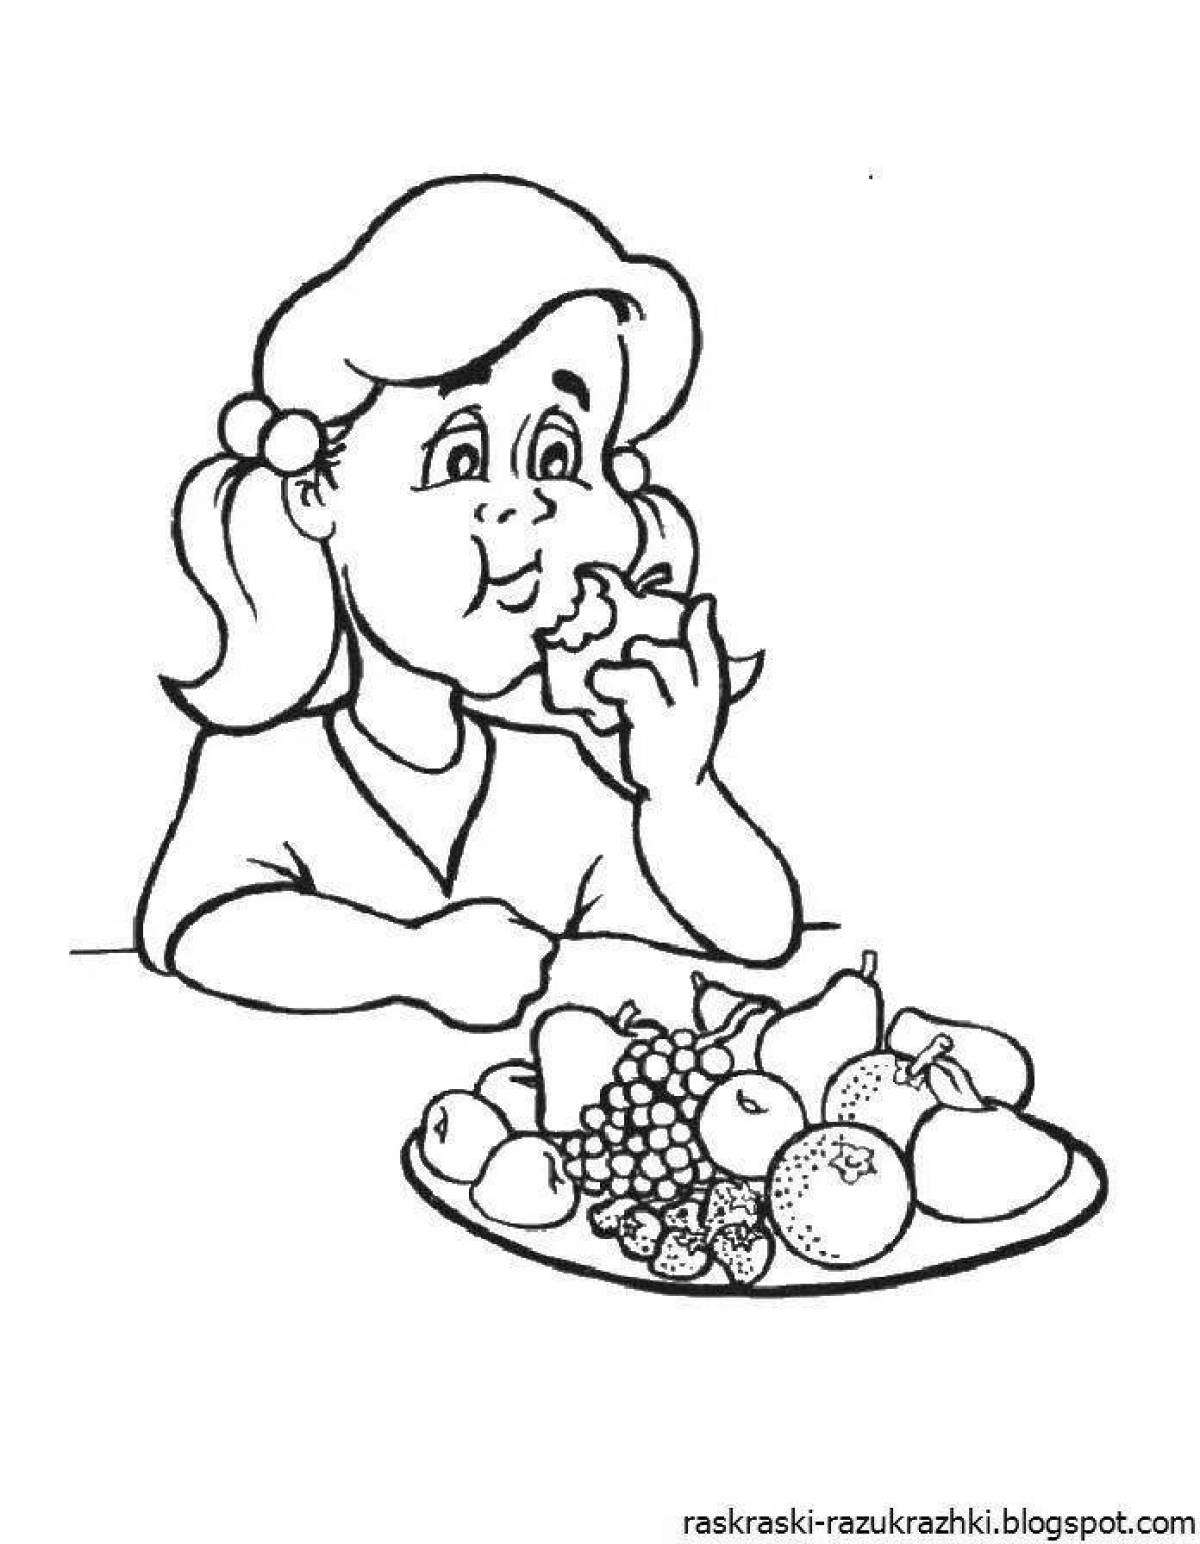 Coloring book about proper nutrition